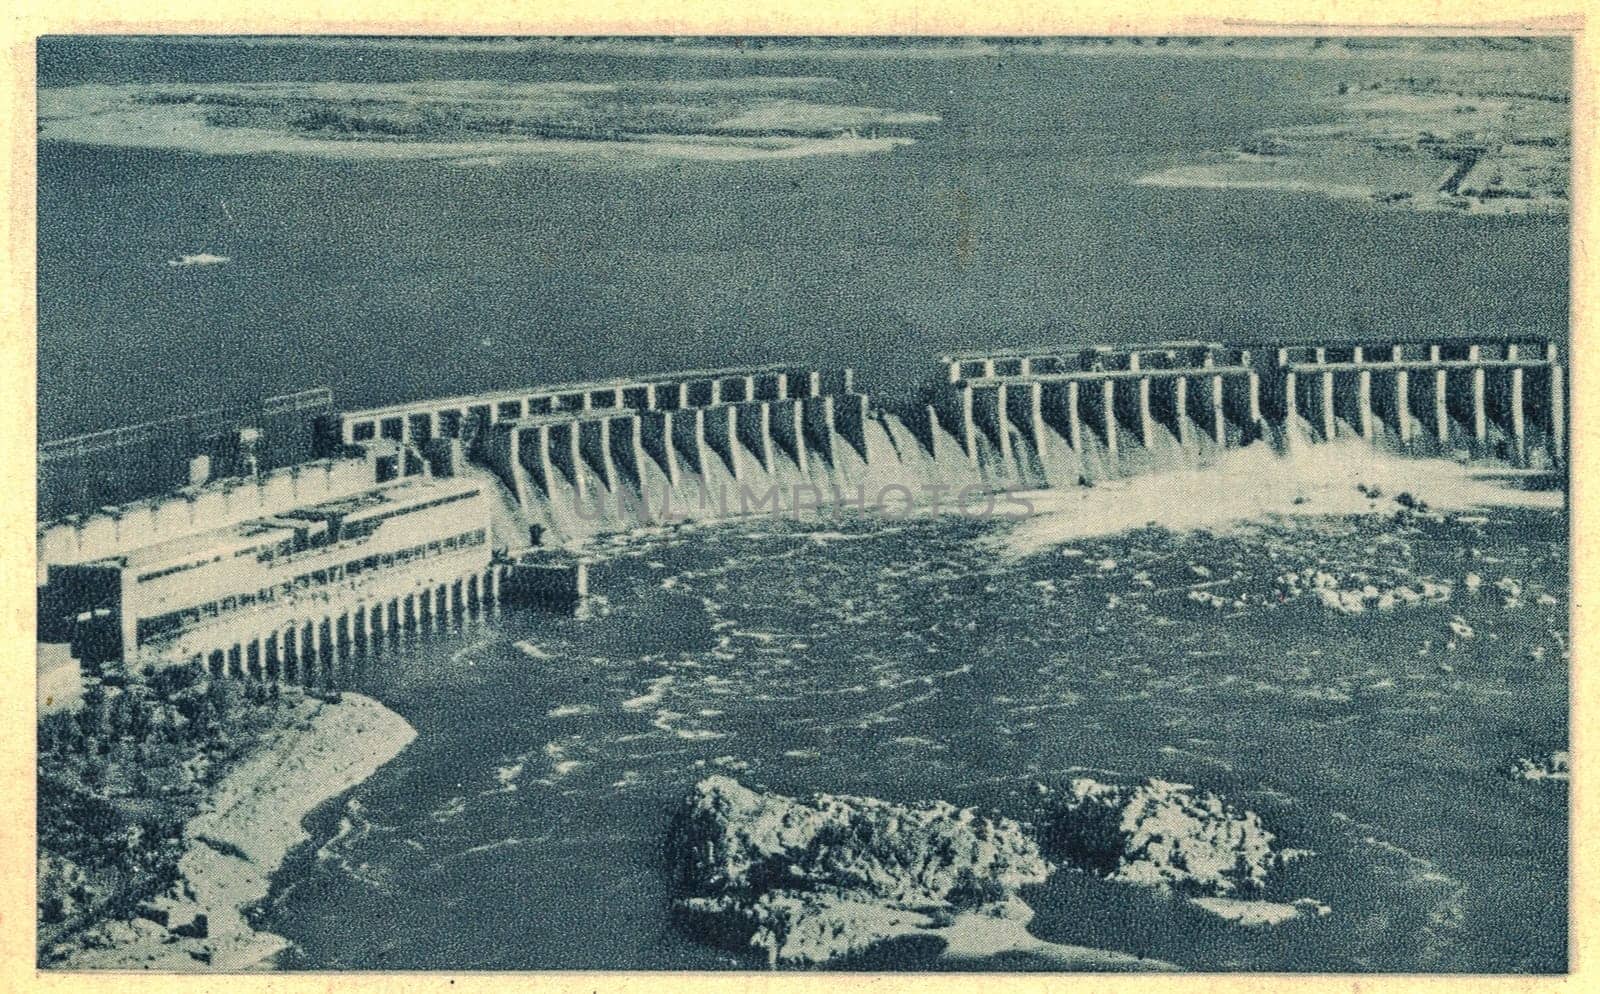 THE DNIEPER, SOVIET UNION - 1943: The bobmardment of hydroelectric power station on the river Dnieper. Dnieper Hydroelectric Station, wiev from Khortytsya